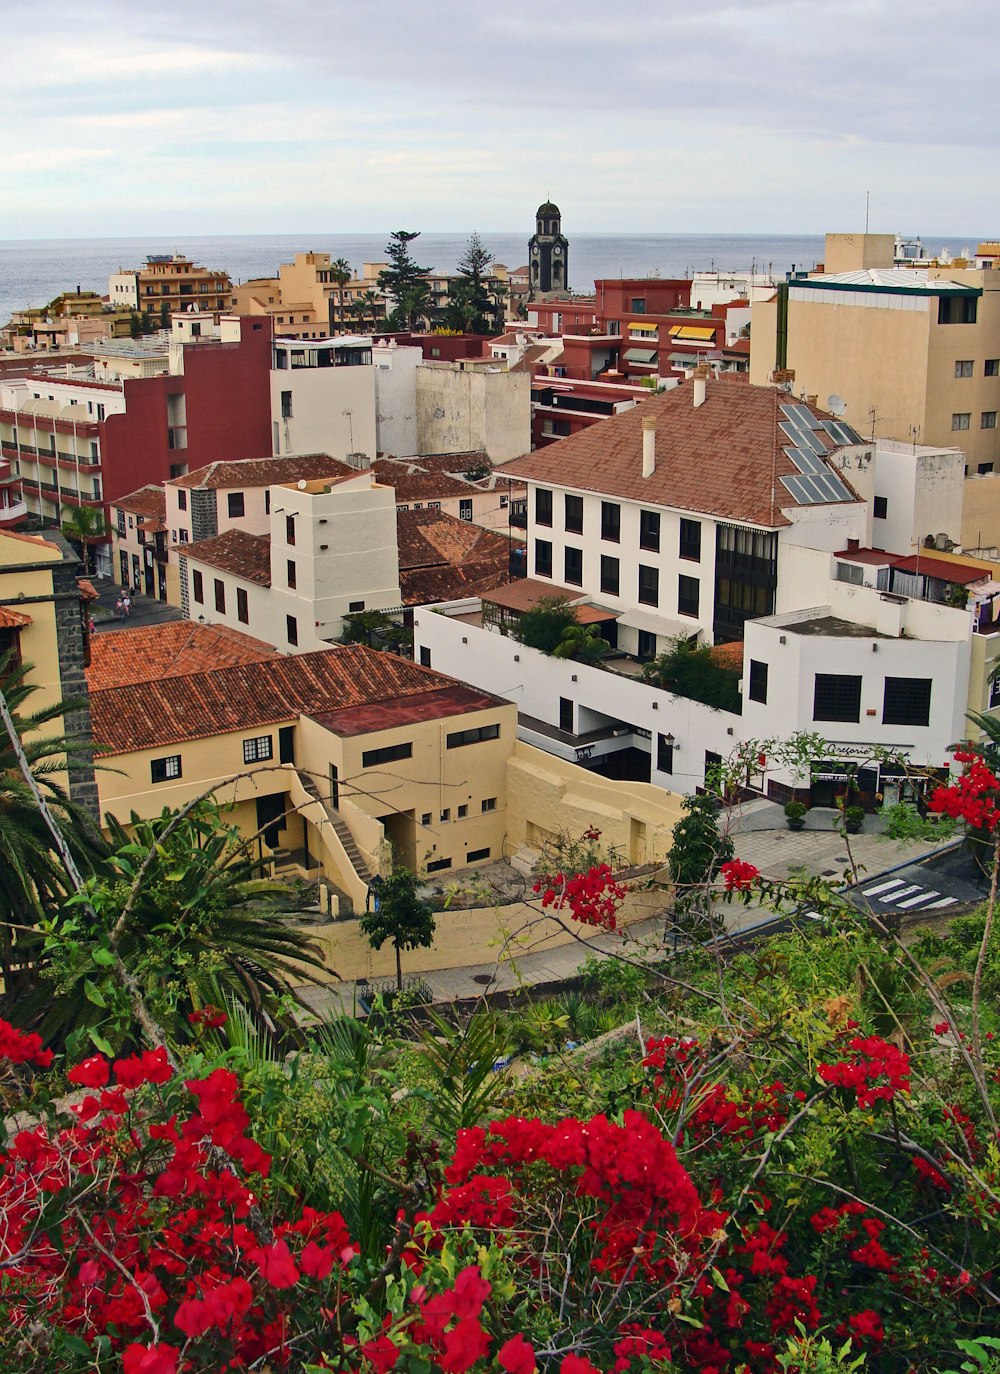 a view of a city with red flowers in the foreground